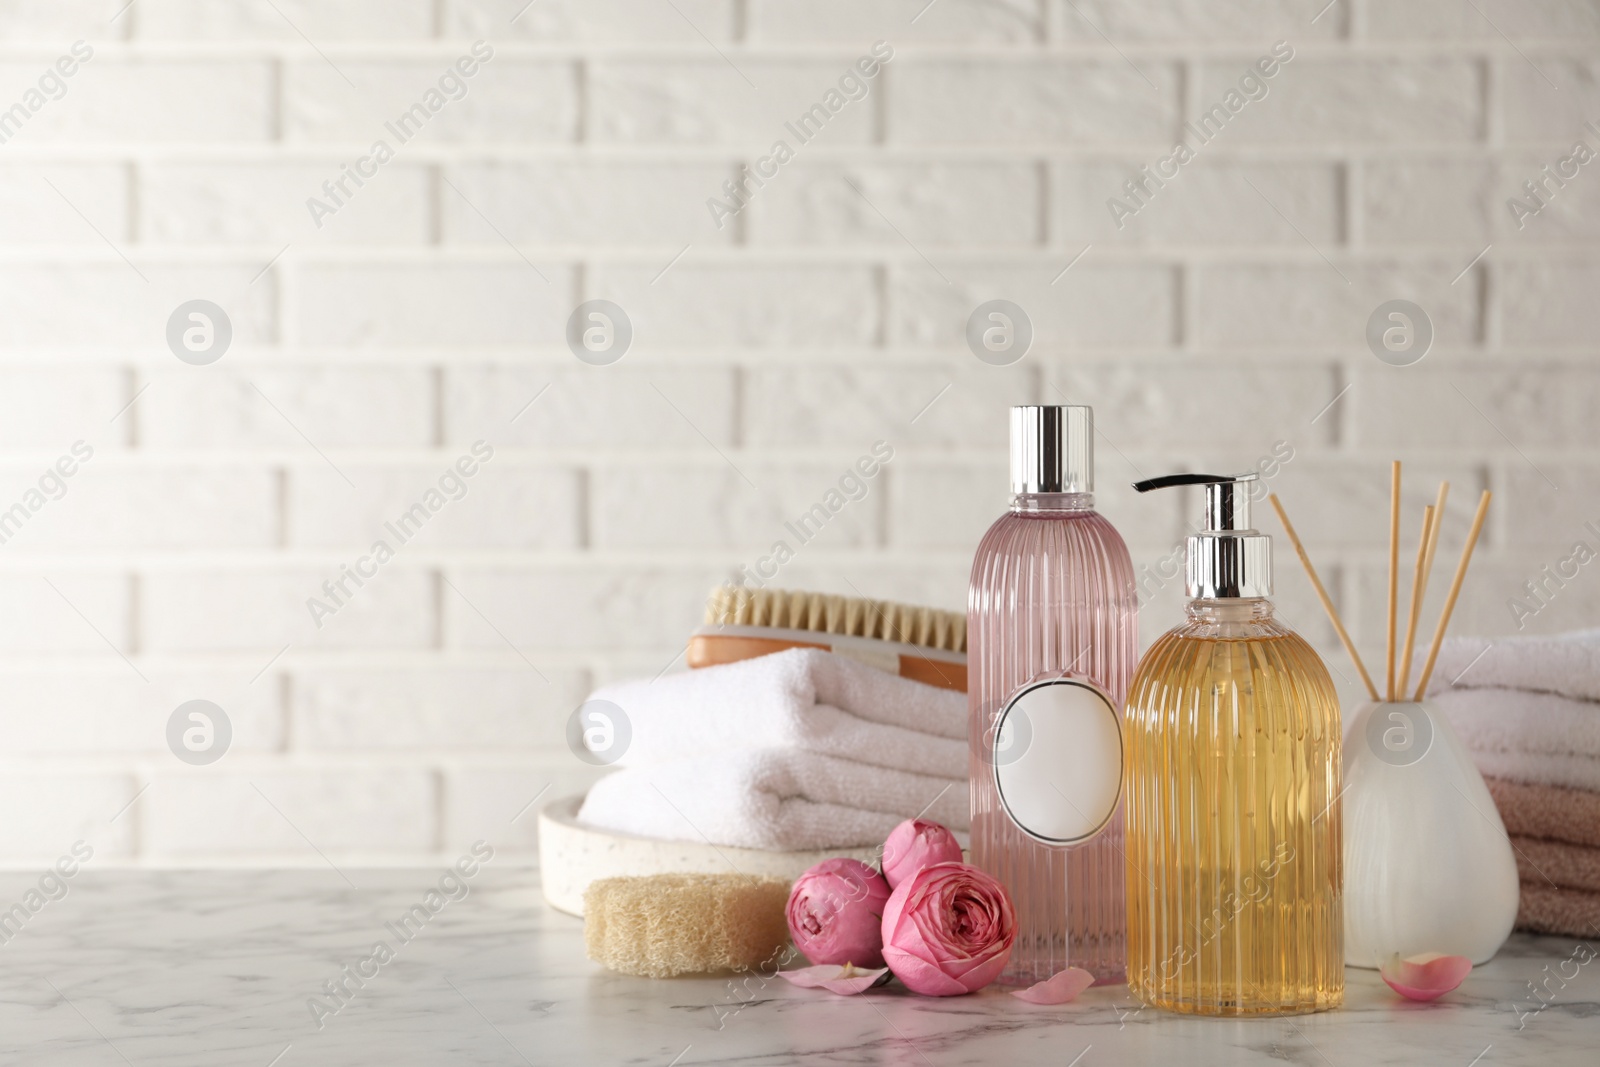 Photo of Stylish dispenser with liquid soap and other bathroom amenities on white marble table, space for text